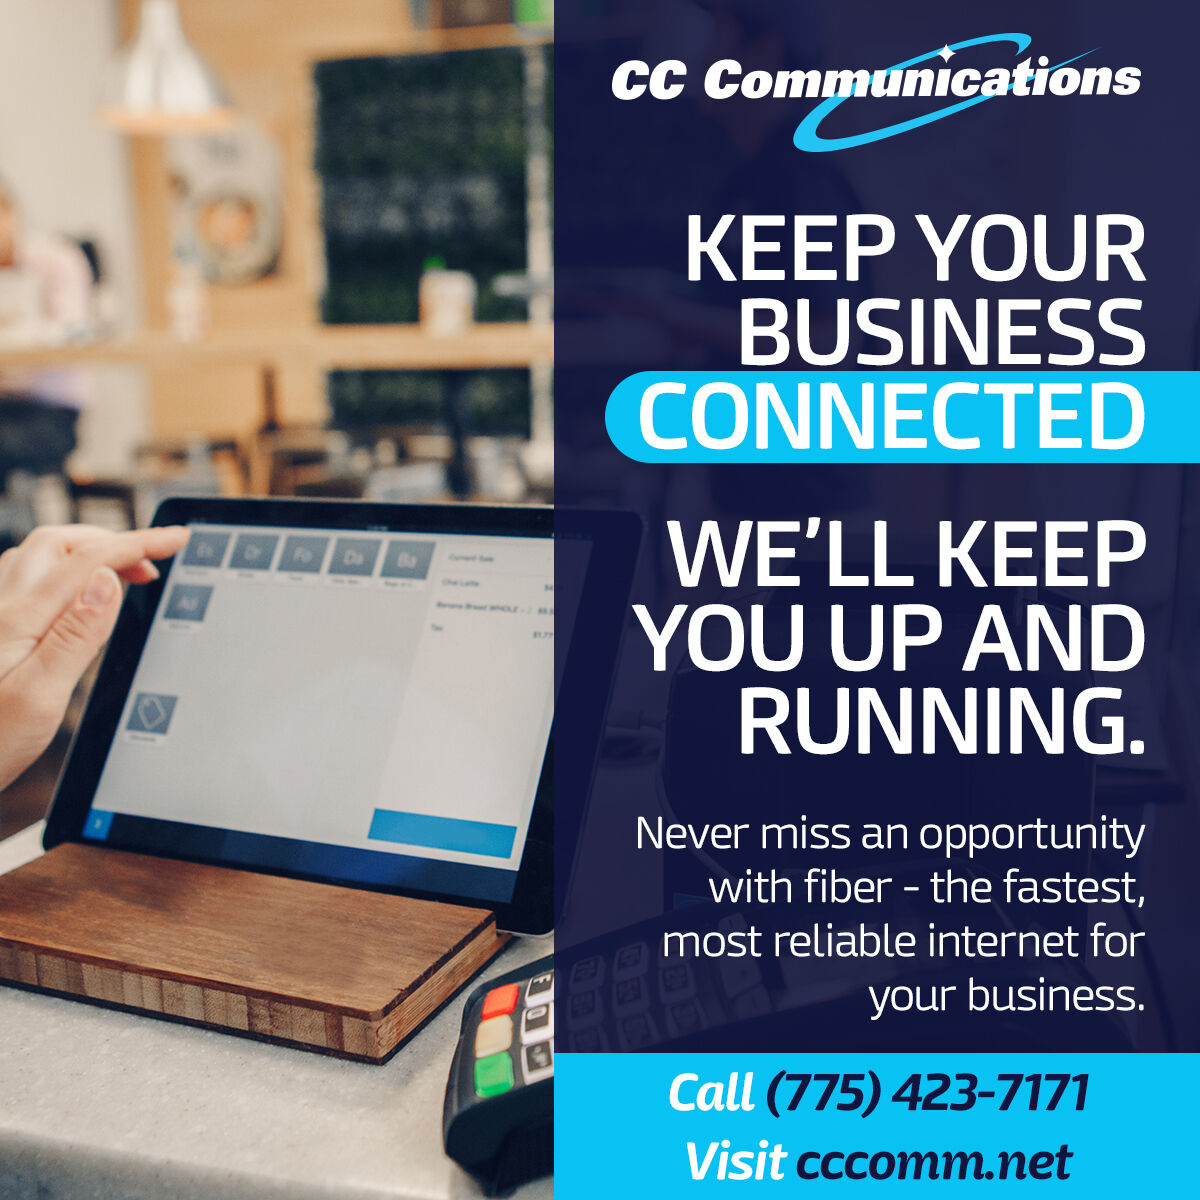 Keep your #BusinessConnected with #FiberInternet from #CCCommunications. We'll keep you up and running. Never miss an opportunity with fiber - the fastest, most reliable Internet for your business. Call (775) 423-7171 or visit cccomm.net to switch today!